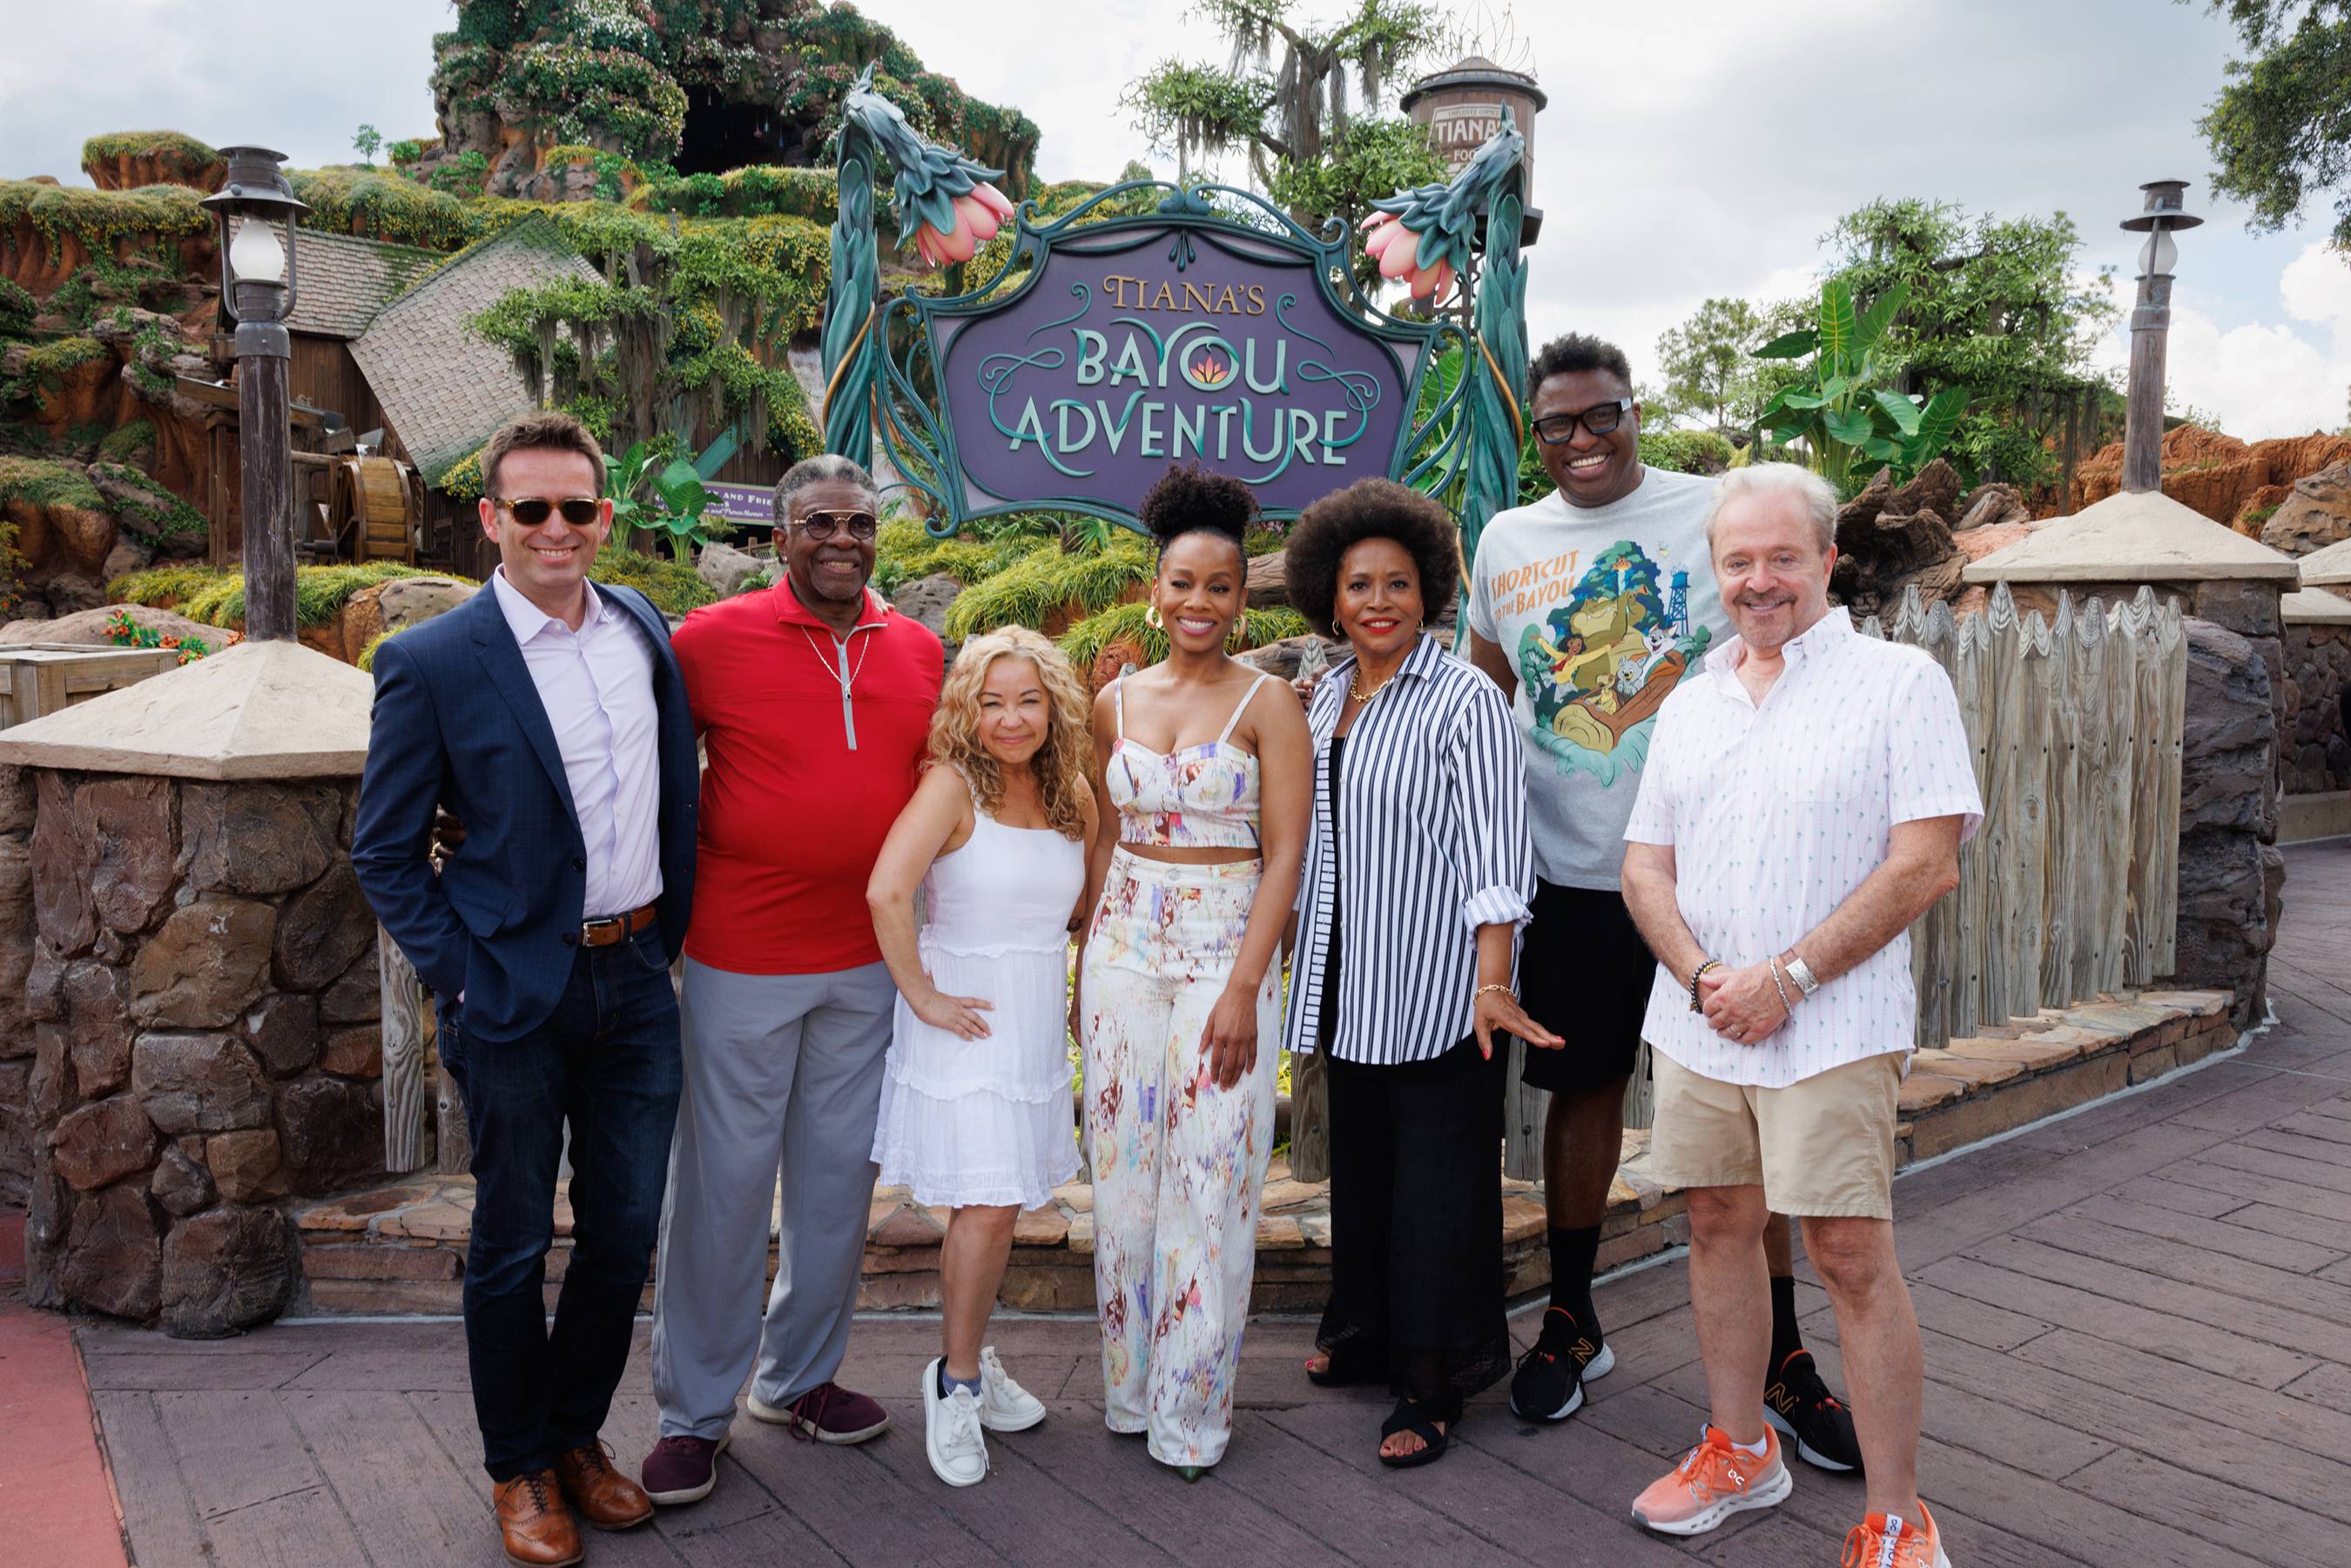 Disney World Hosts 'The Princess and the Frog' Cast for Tiana's Bayou Adventure Launch